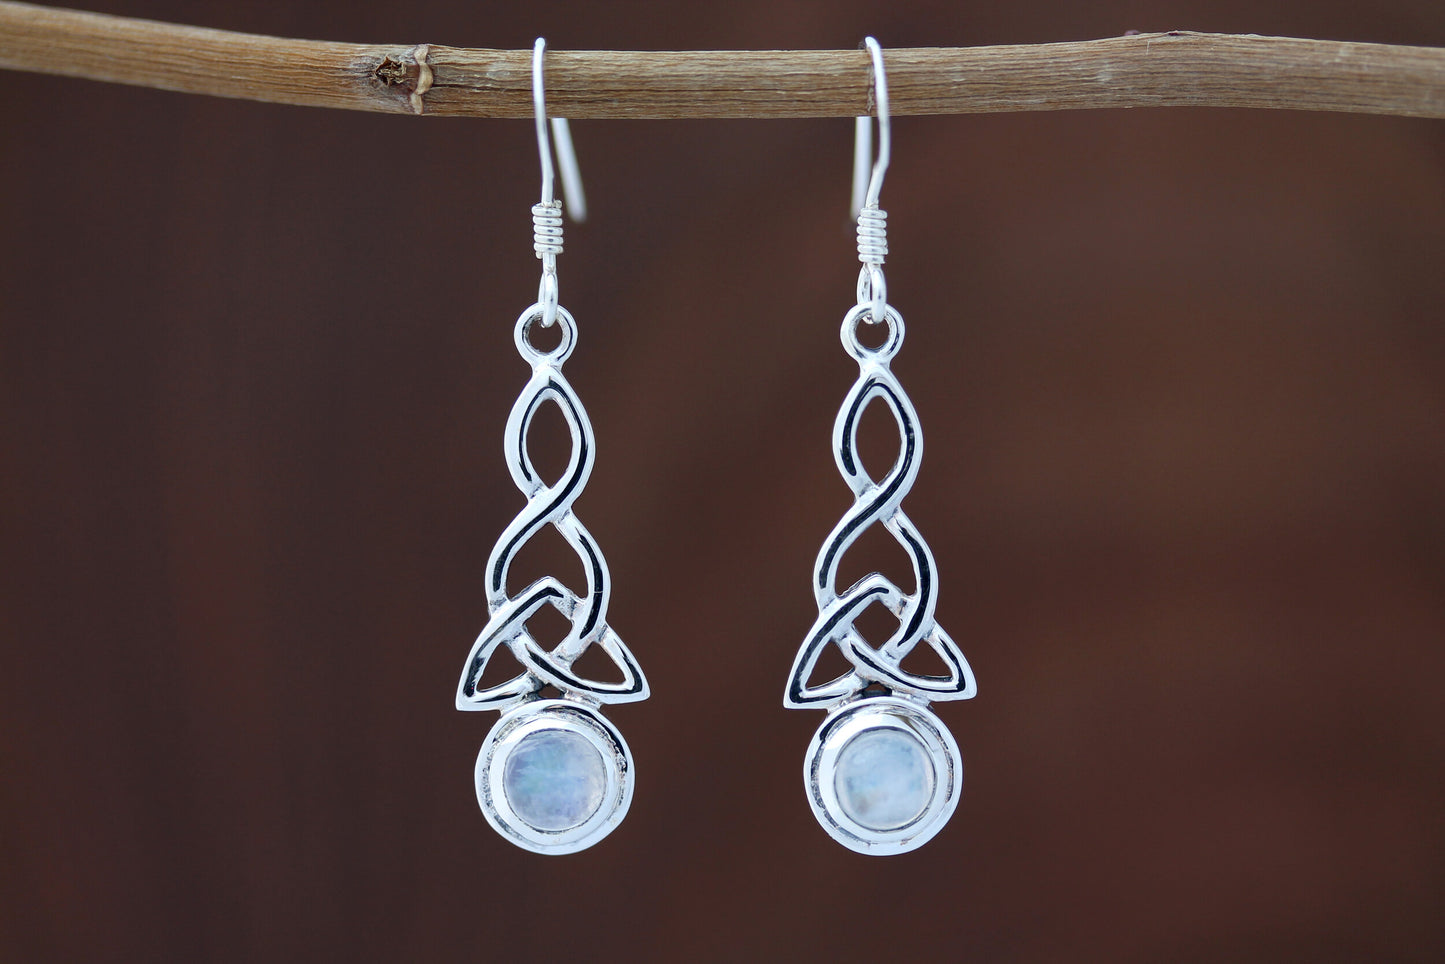 Triquetra Earrings - Looped Triquetra with Moonstone